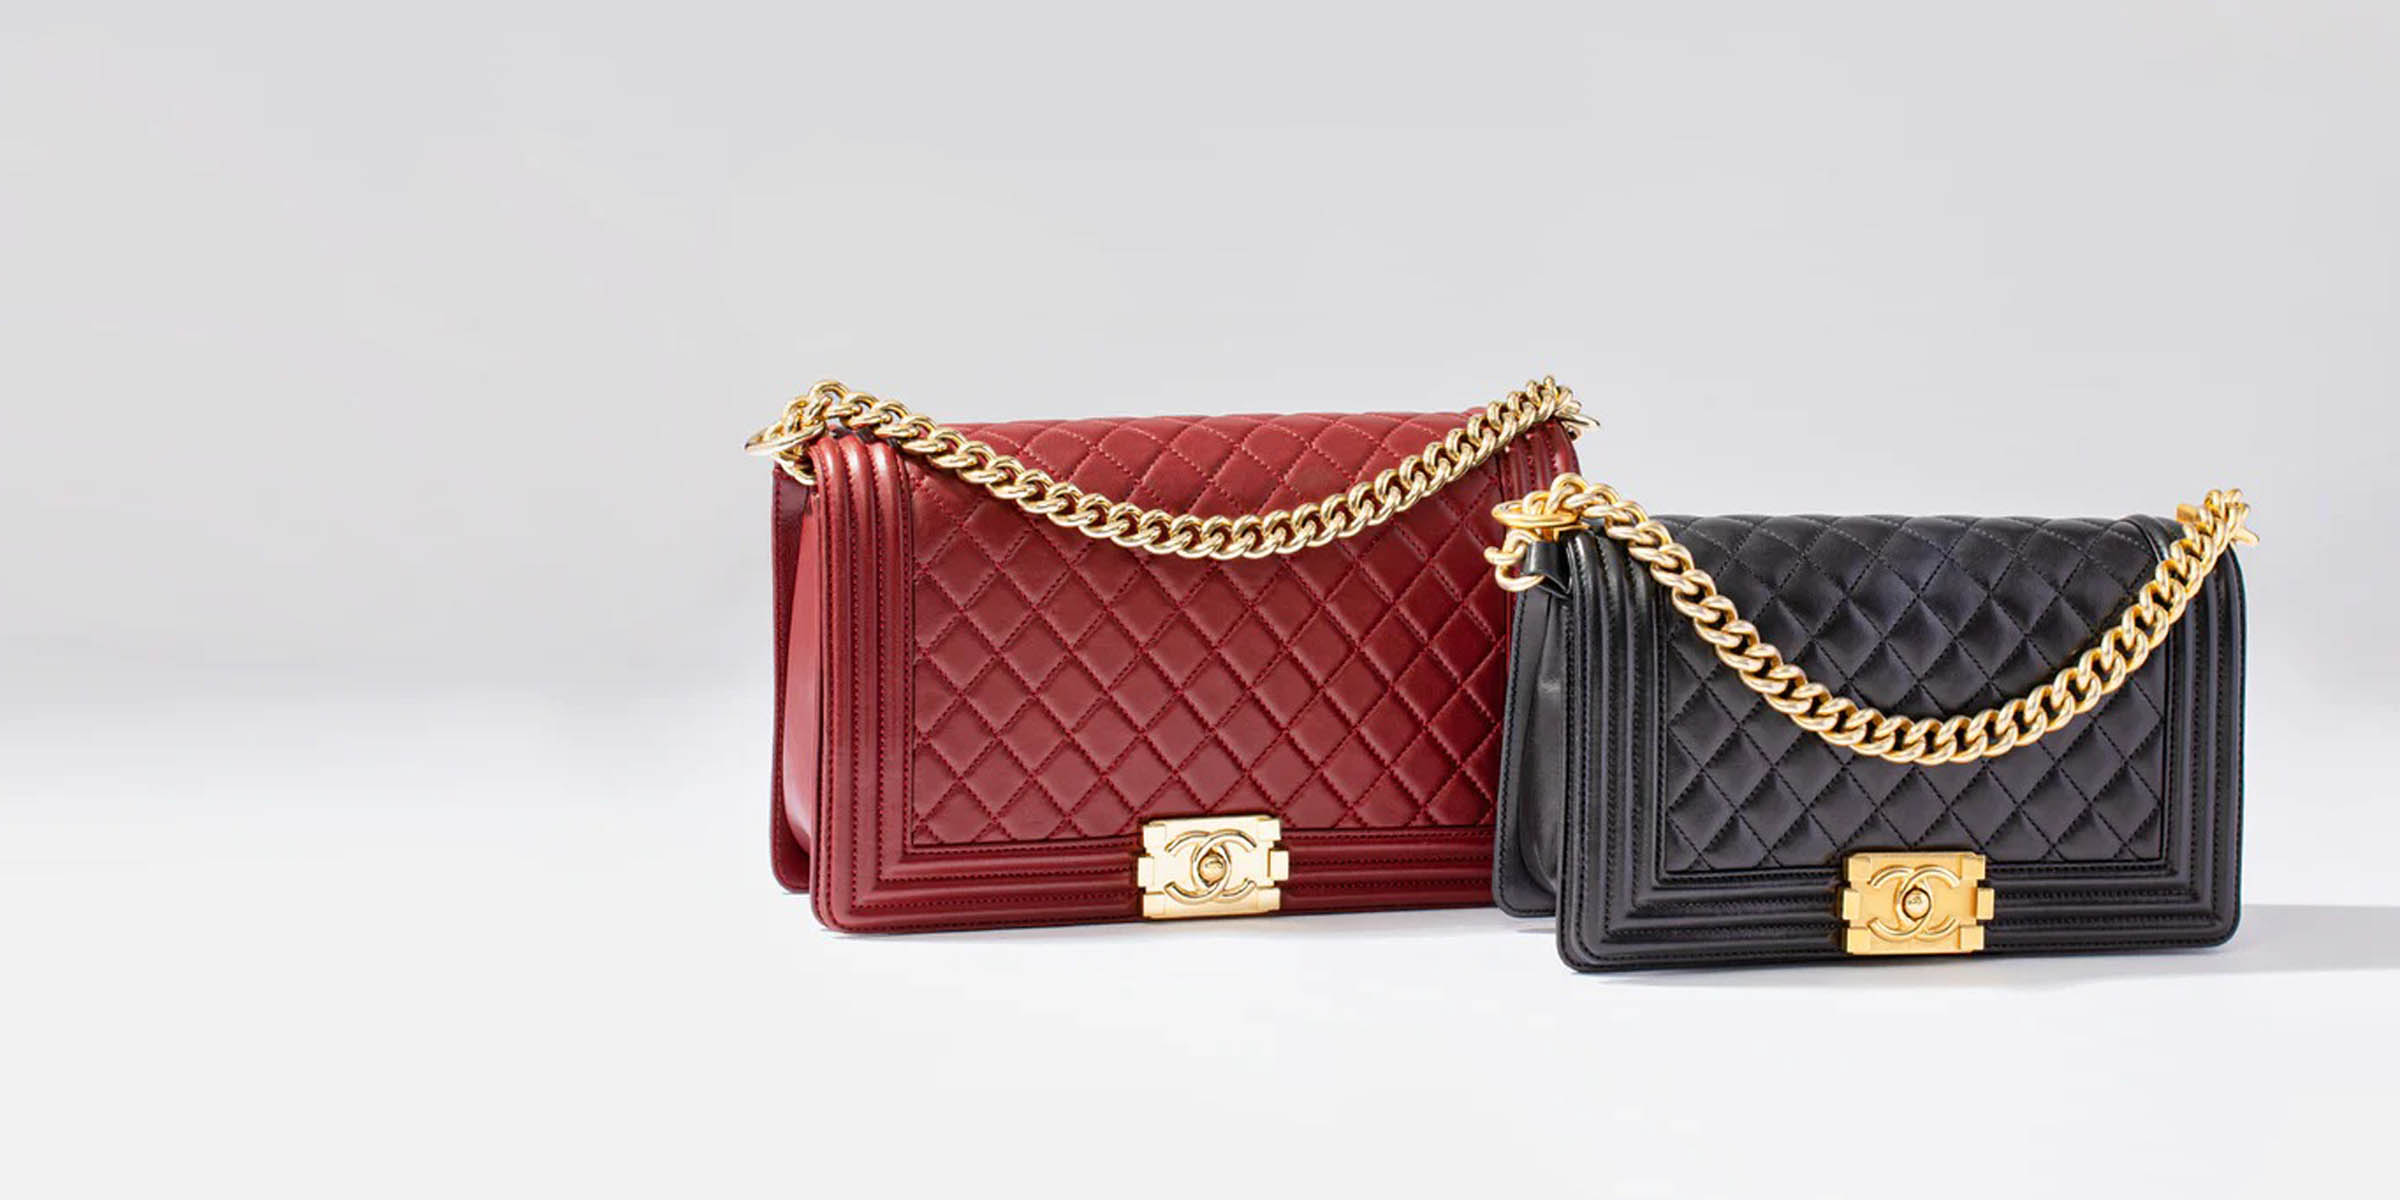 The Price of Chanels Classic Flap Bag Has Nearly Tripled in the Last  Decade  PurseBlog